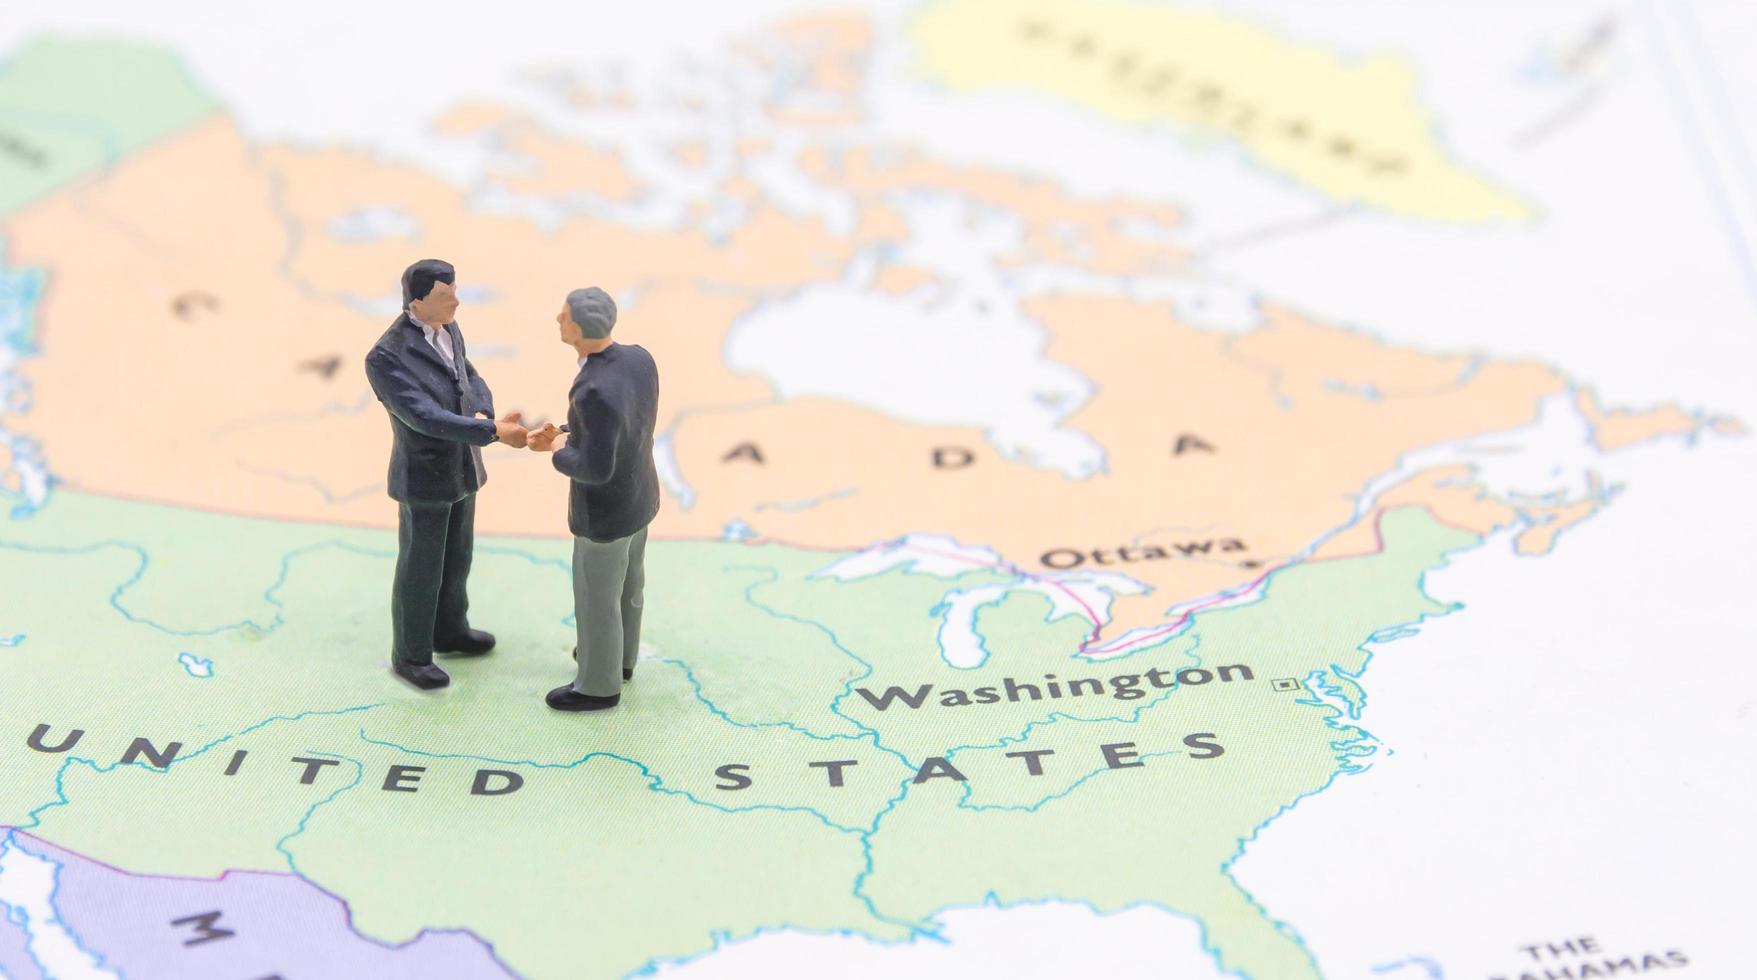 Miniature people, businessman standing on map American photo